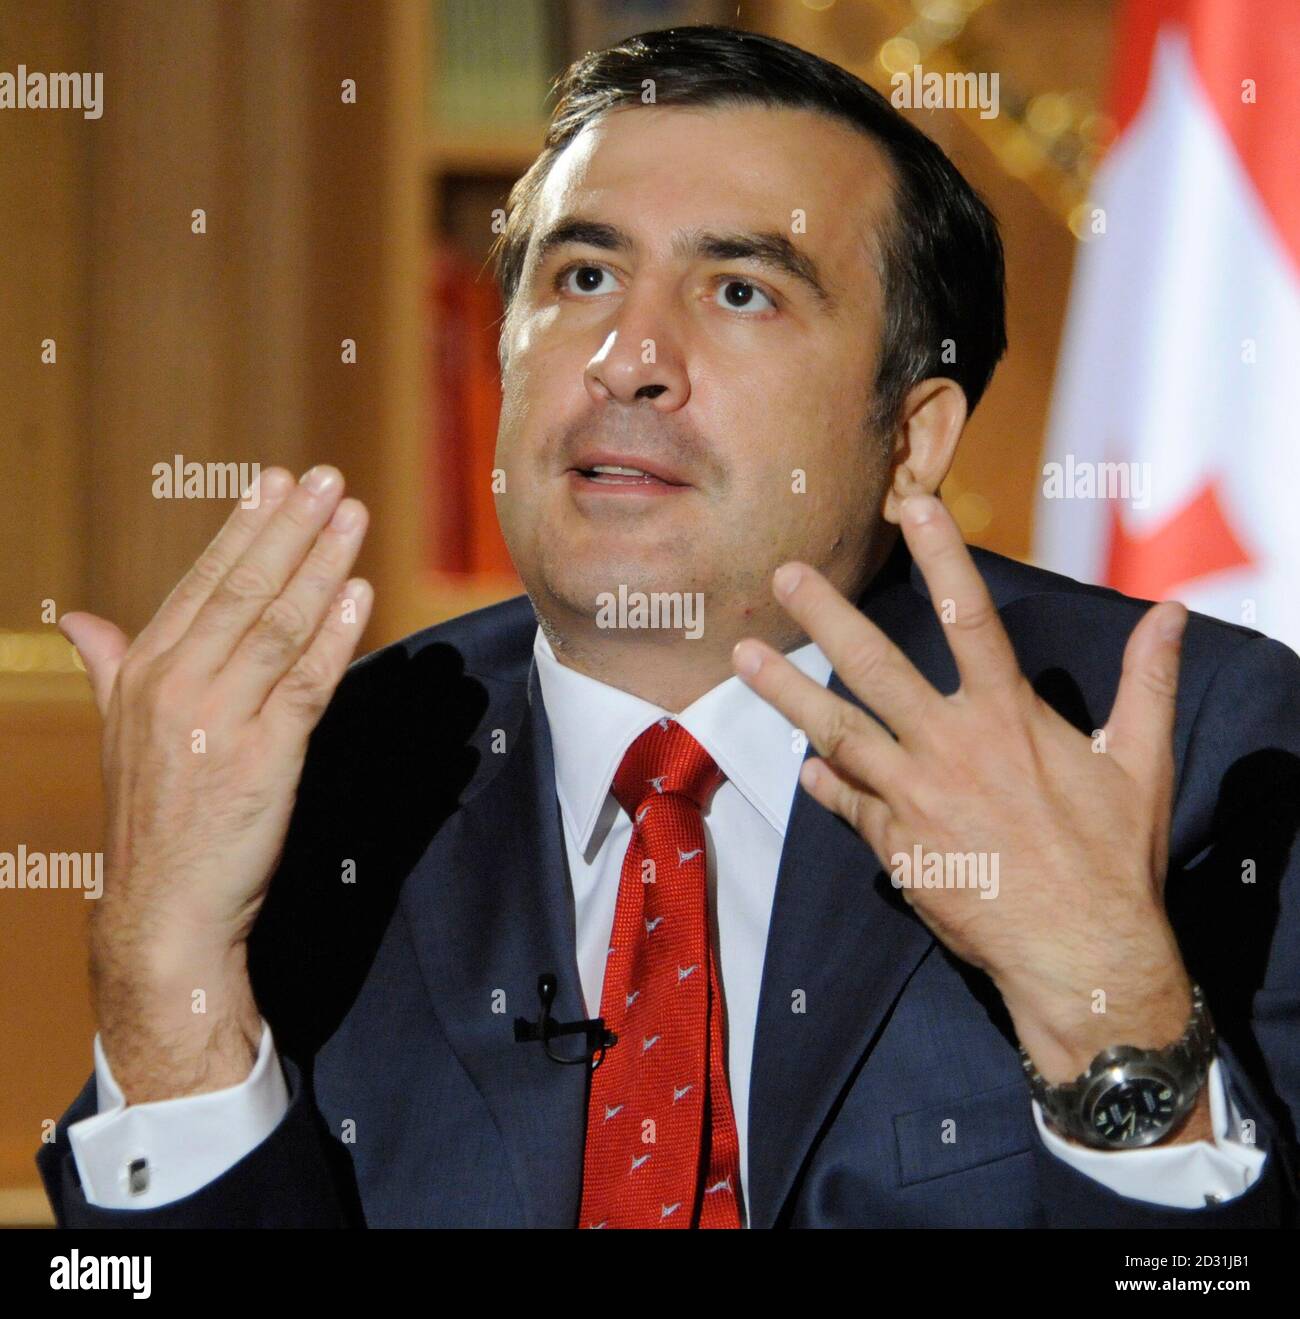 President Mikheil Saakashvili speaks during an interview with Reuters in Tbilisi, July 31, 2009. Saakashvili said Georgia knows it cannot take back its Russian-backed rebel regions militarily but fears Moscow has designs on Tbilisi. Picture taken July 31, 2009.  REUTERS/Irakli Gedenidze  (GEORGIA POLITICS HEADSHOT IMAGES OF THE DAY CONFLICT) Stock Photo